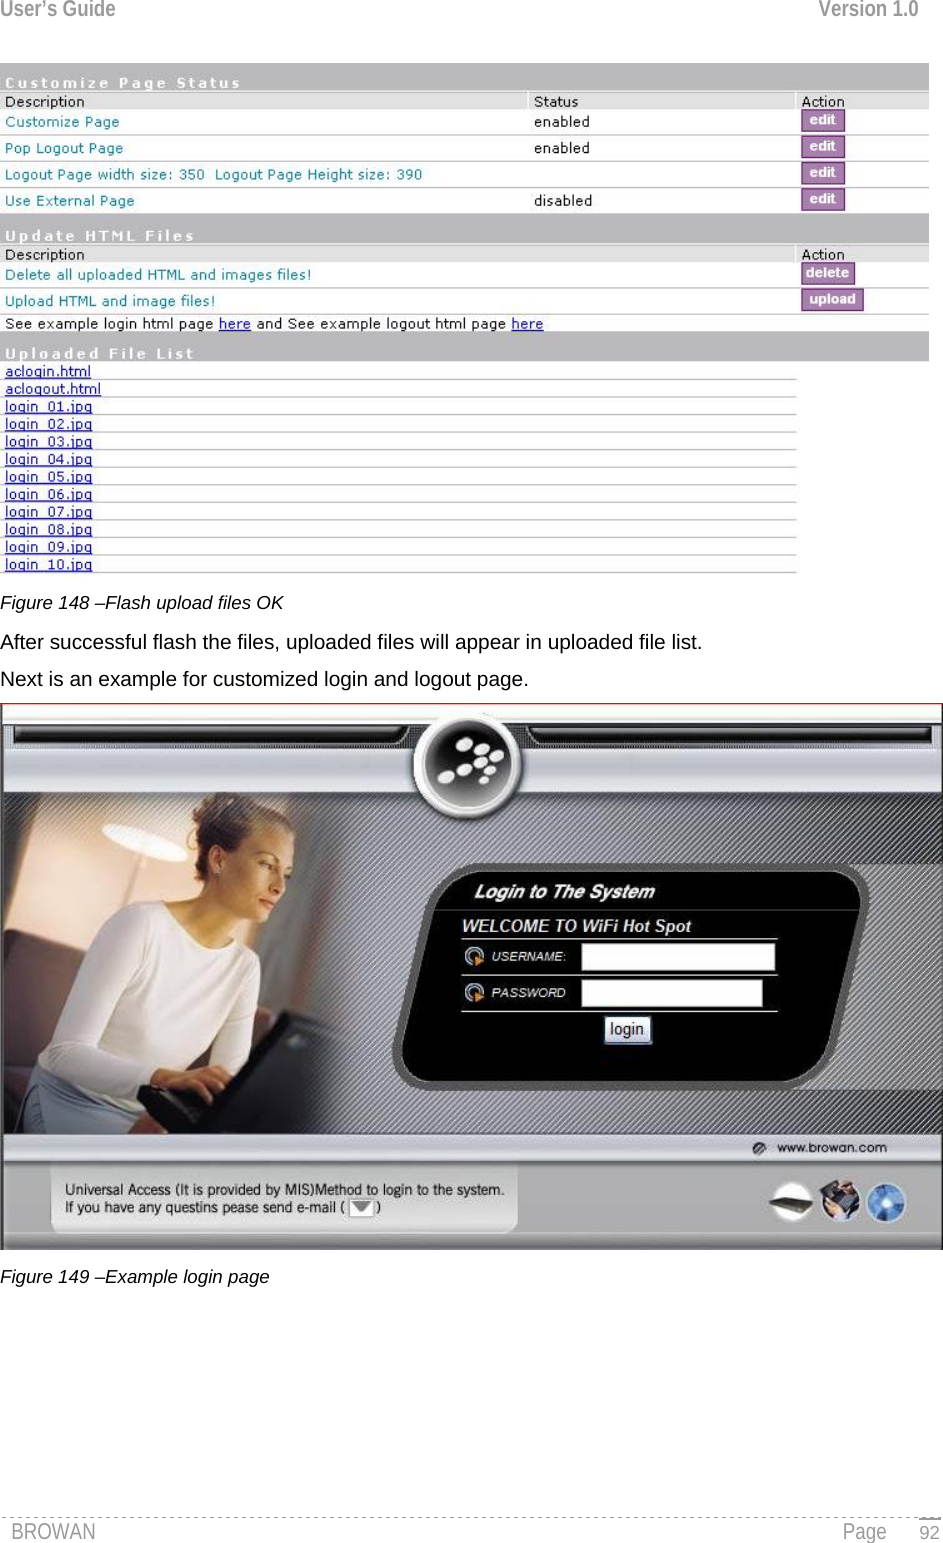 User’s Guide  Version 1.0    Figure 148 –Flash upload files OK  After successful flash the files, uploaded files will appear in uploaded file list. Next is an example for customized login and logout page.  Figure 149 –Example login page           BROWAN                                                                                                                                               Page   92